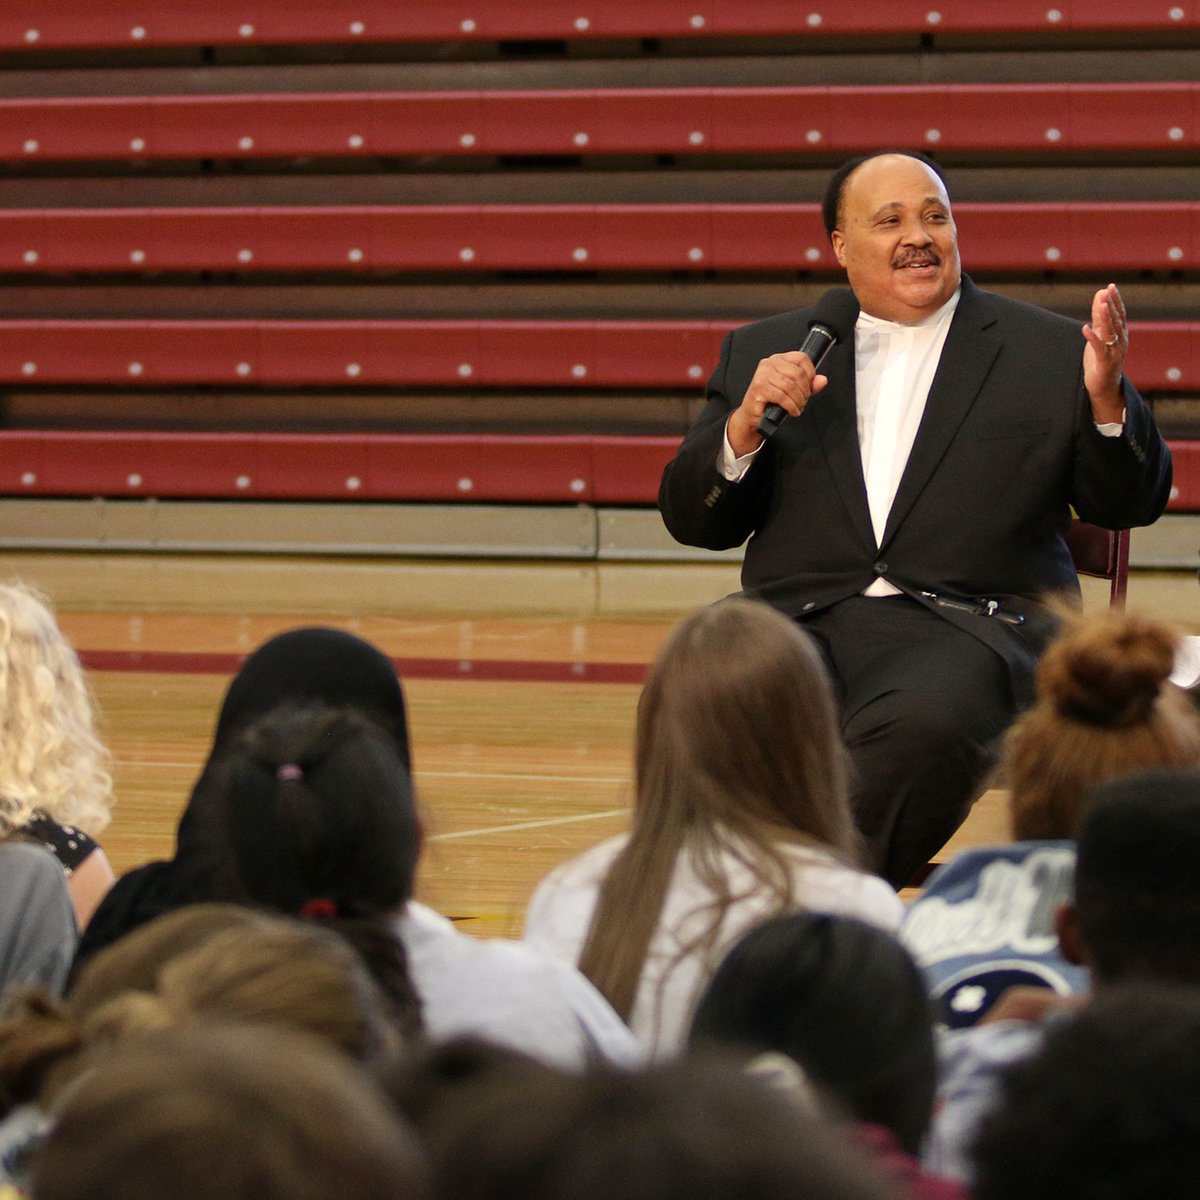 'As young people, this is your time to develop your foundation that will carry you through life.' 

Thank you, @OfficialMLK3, for speaking to our community today! #realizingthedream